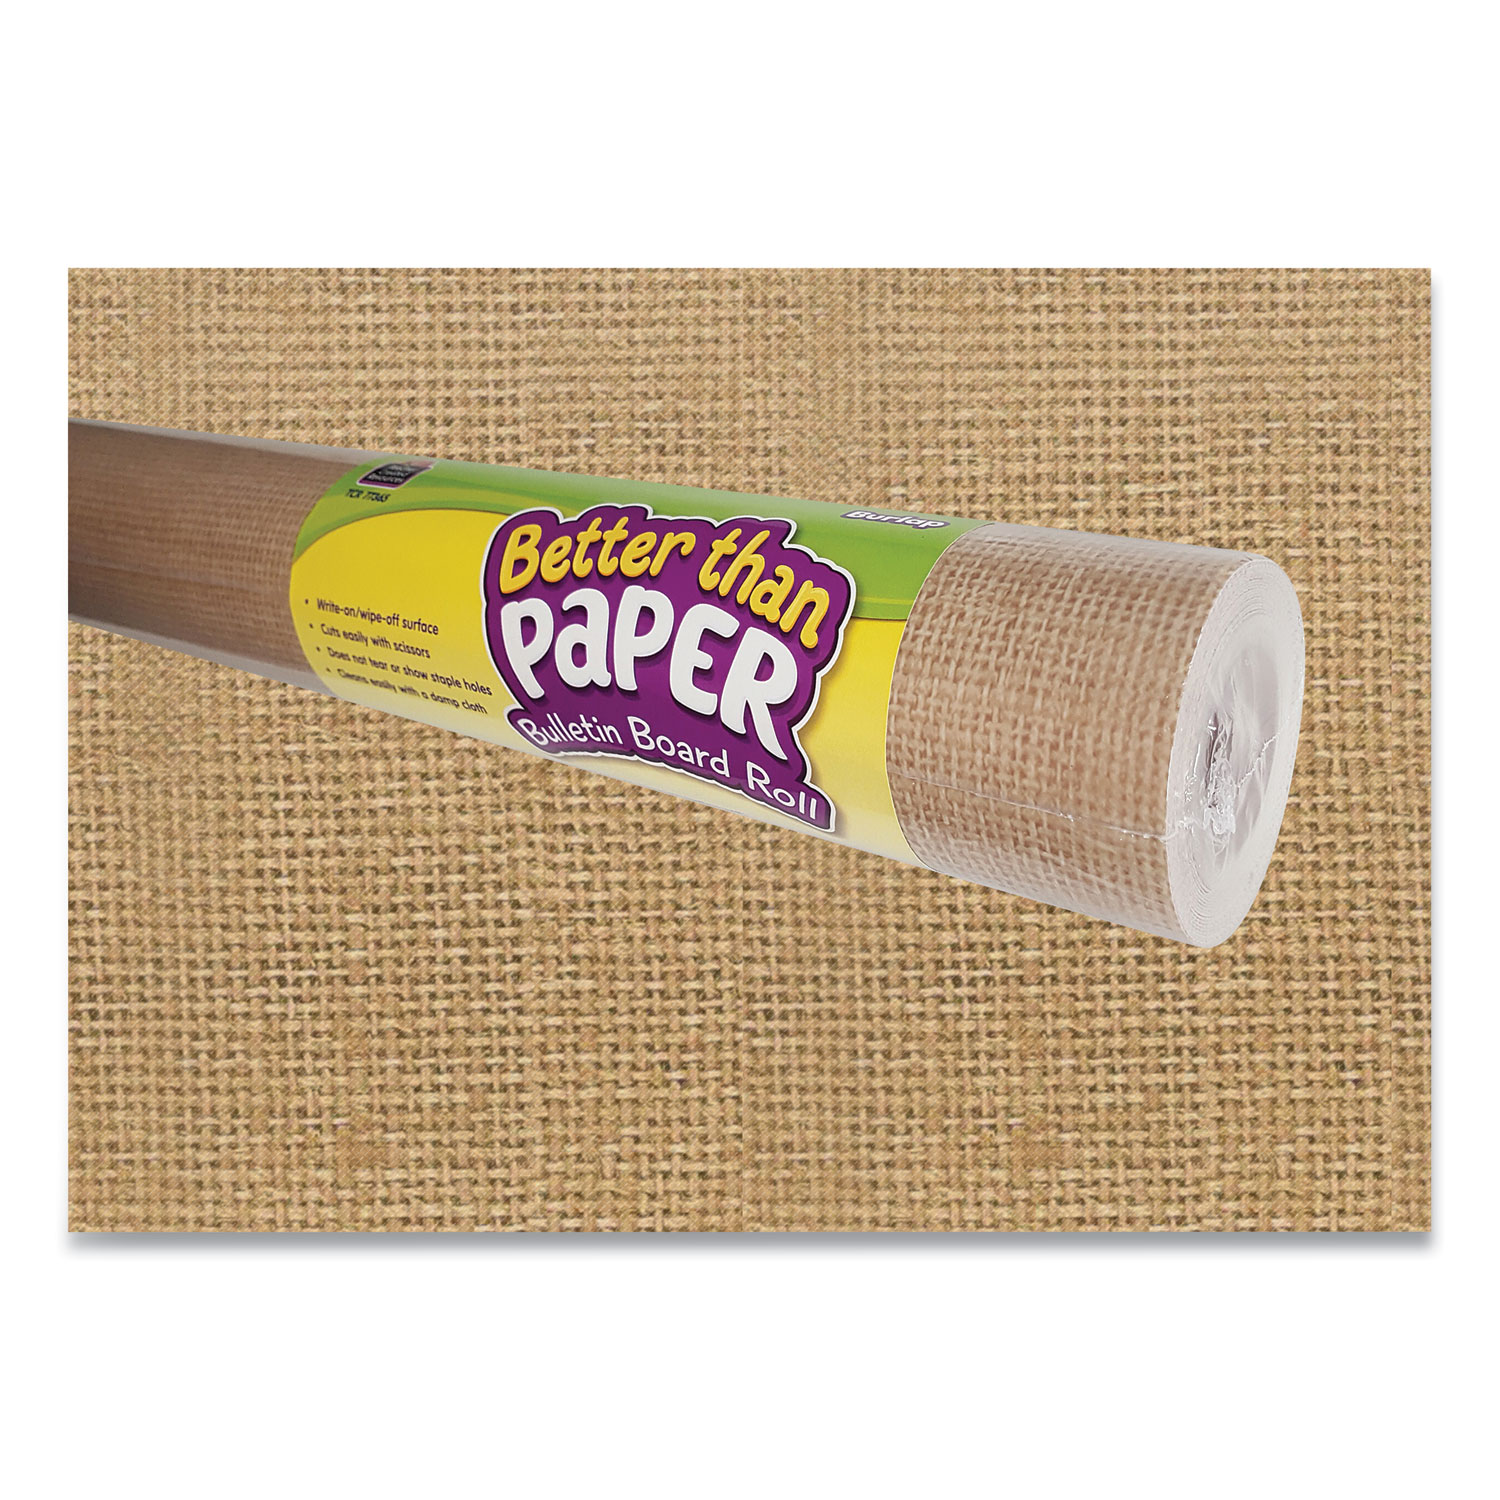  Teacher Created Resources TCR77365 Better Than Paper Bulletin Board Roll, 4 ft x 12 ft, Burlap (TCR24366092) 